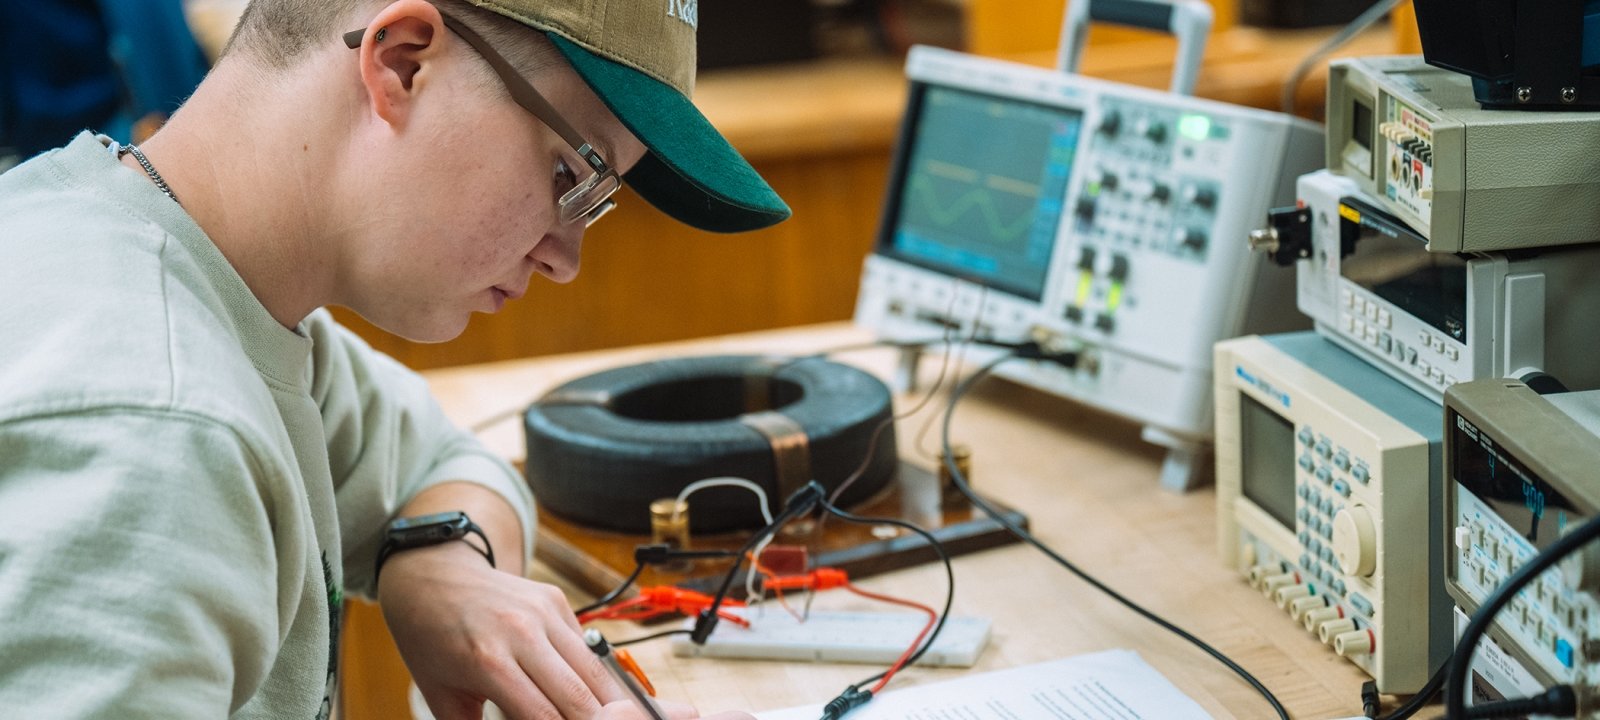 An Electrical Engineering Technology student works in the lab